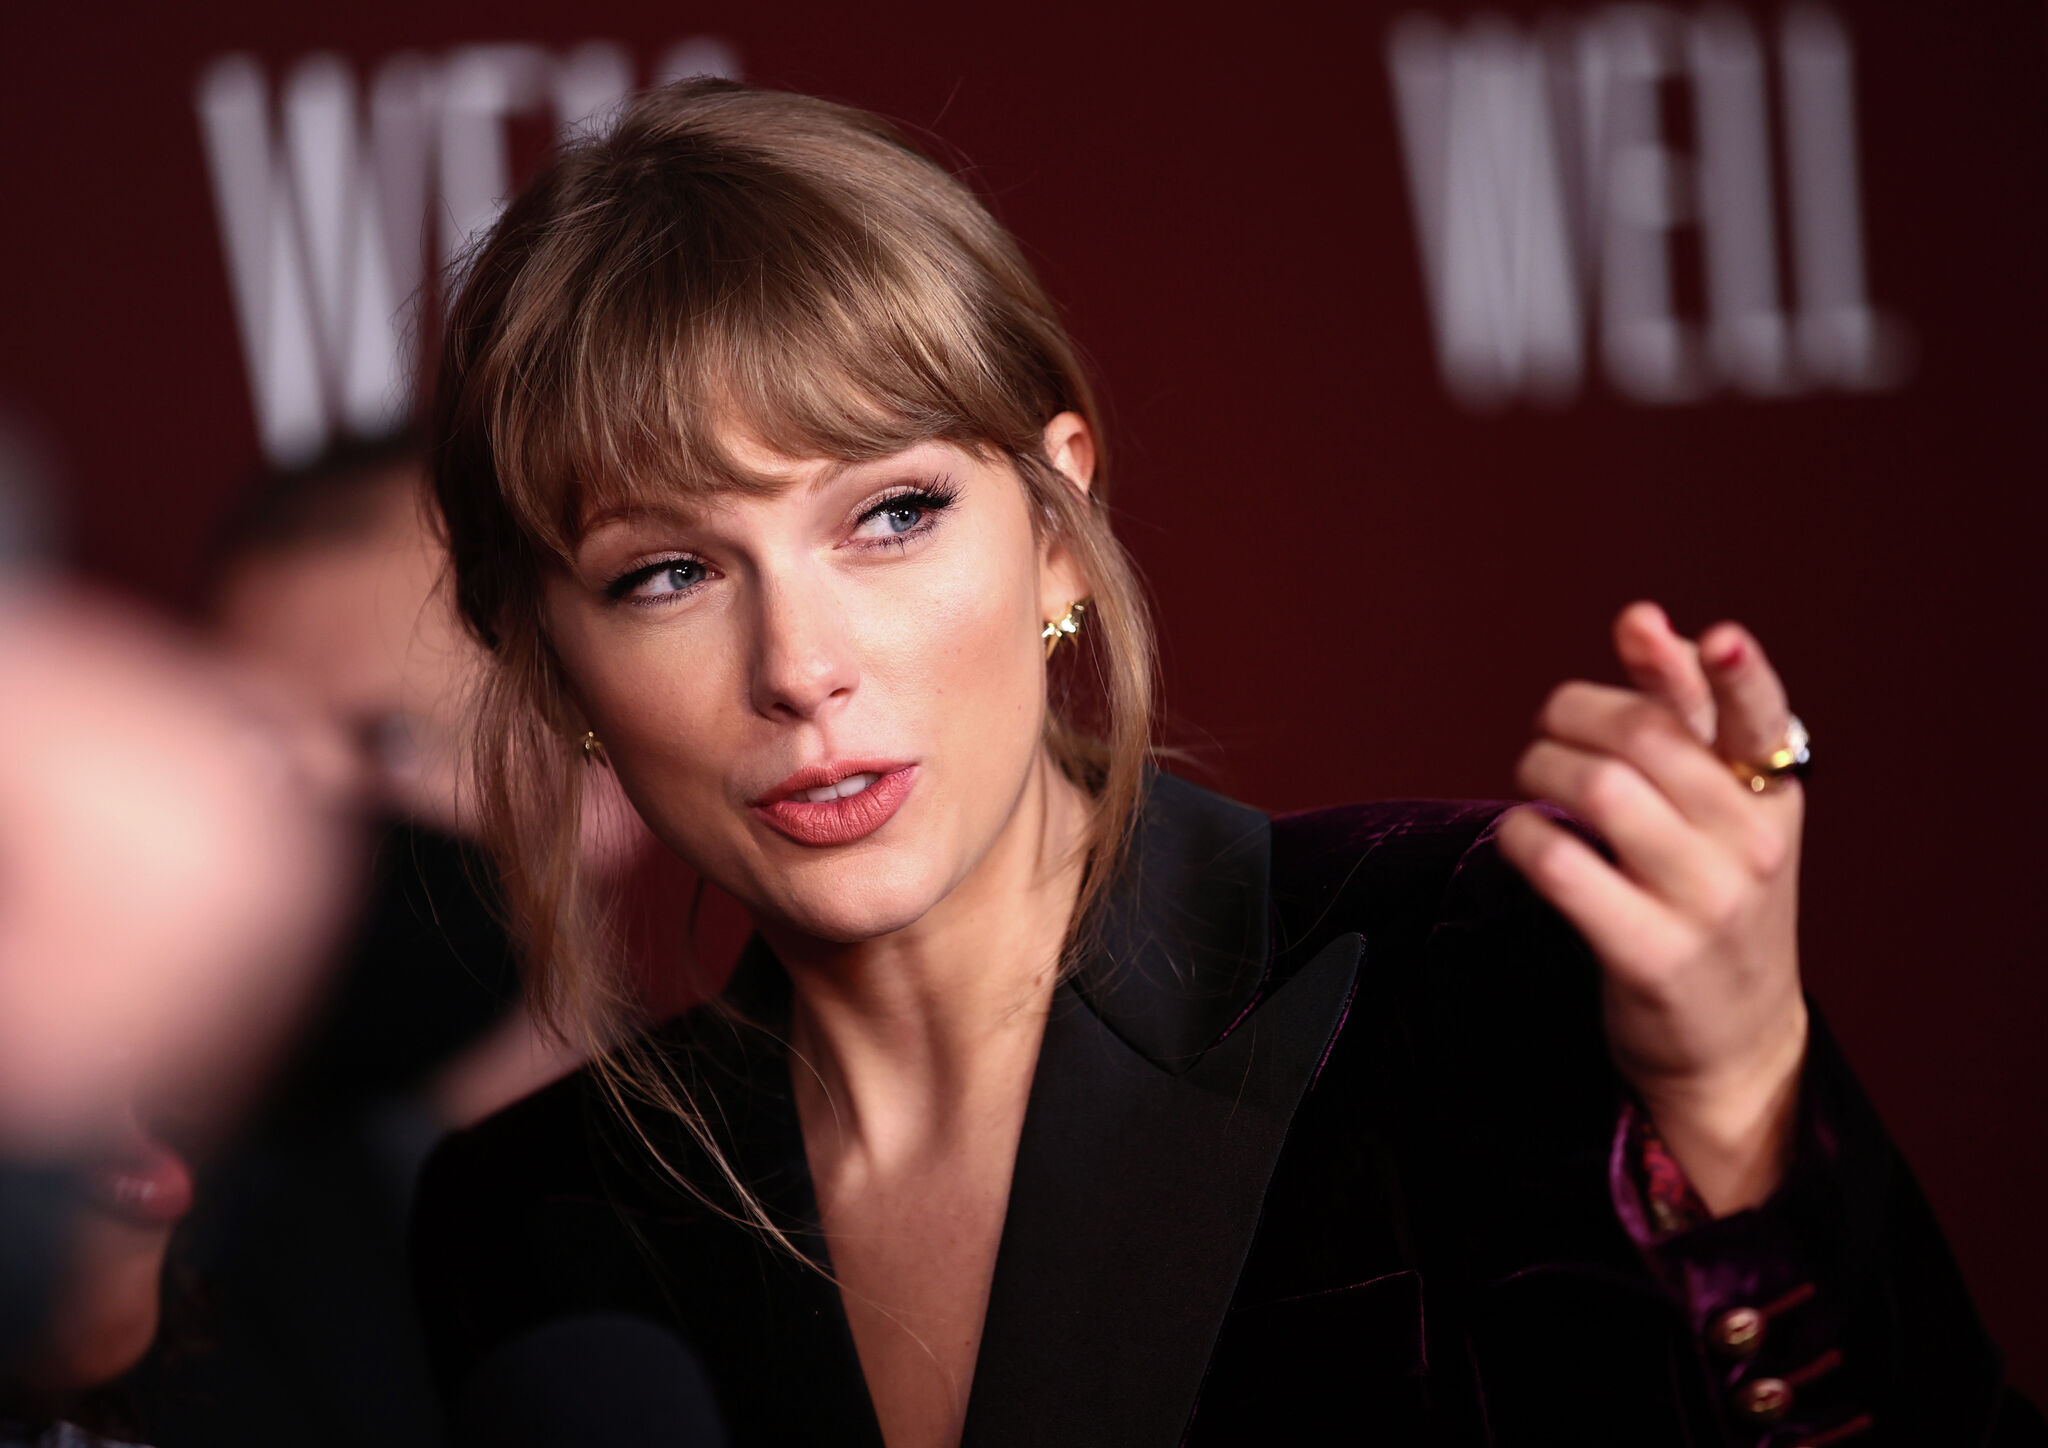 University of Texas offers Taylor Swift course this fall